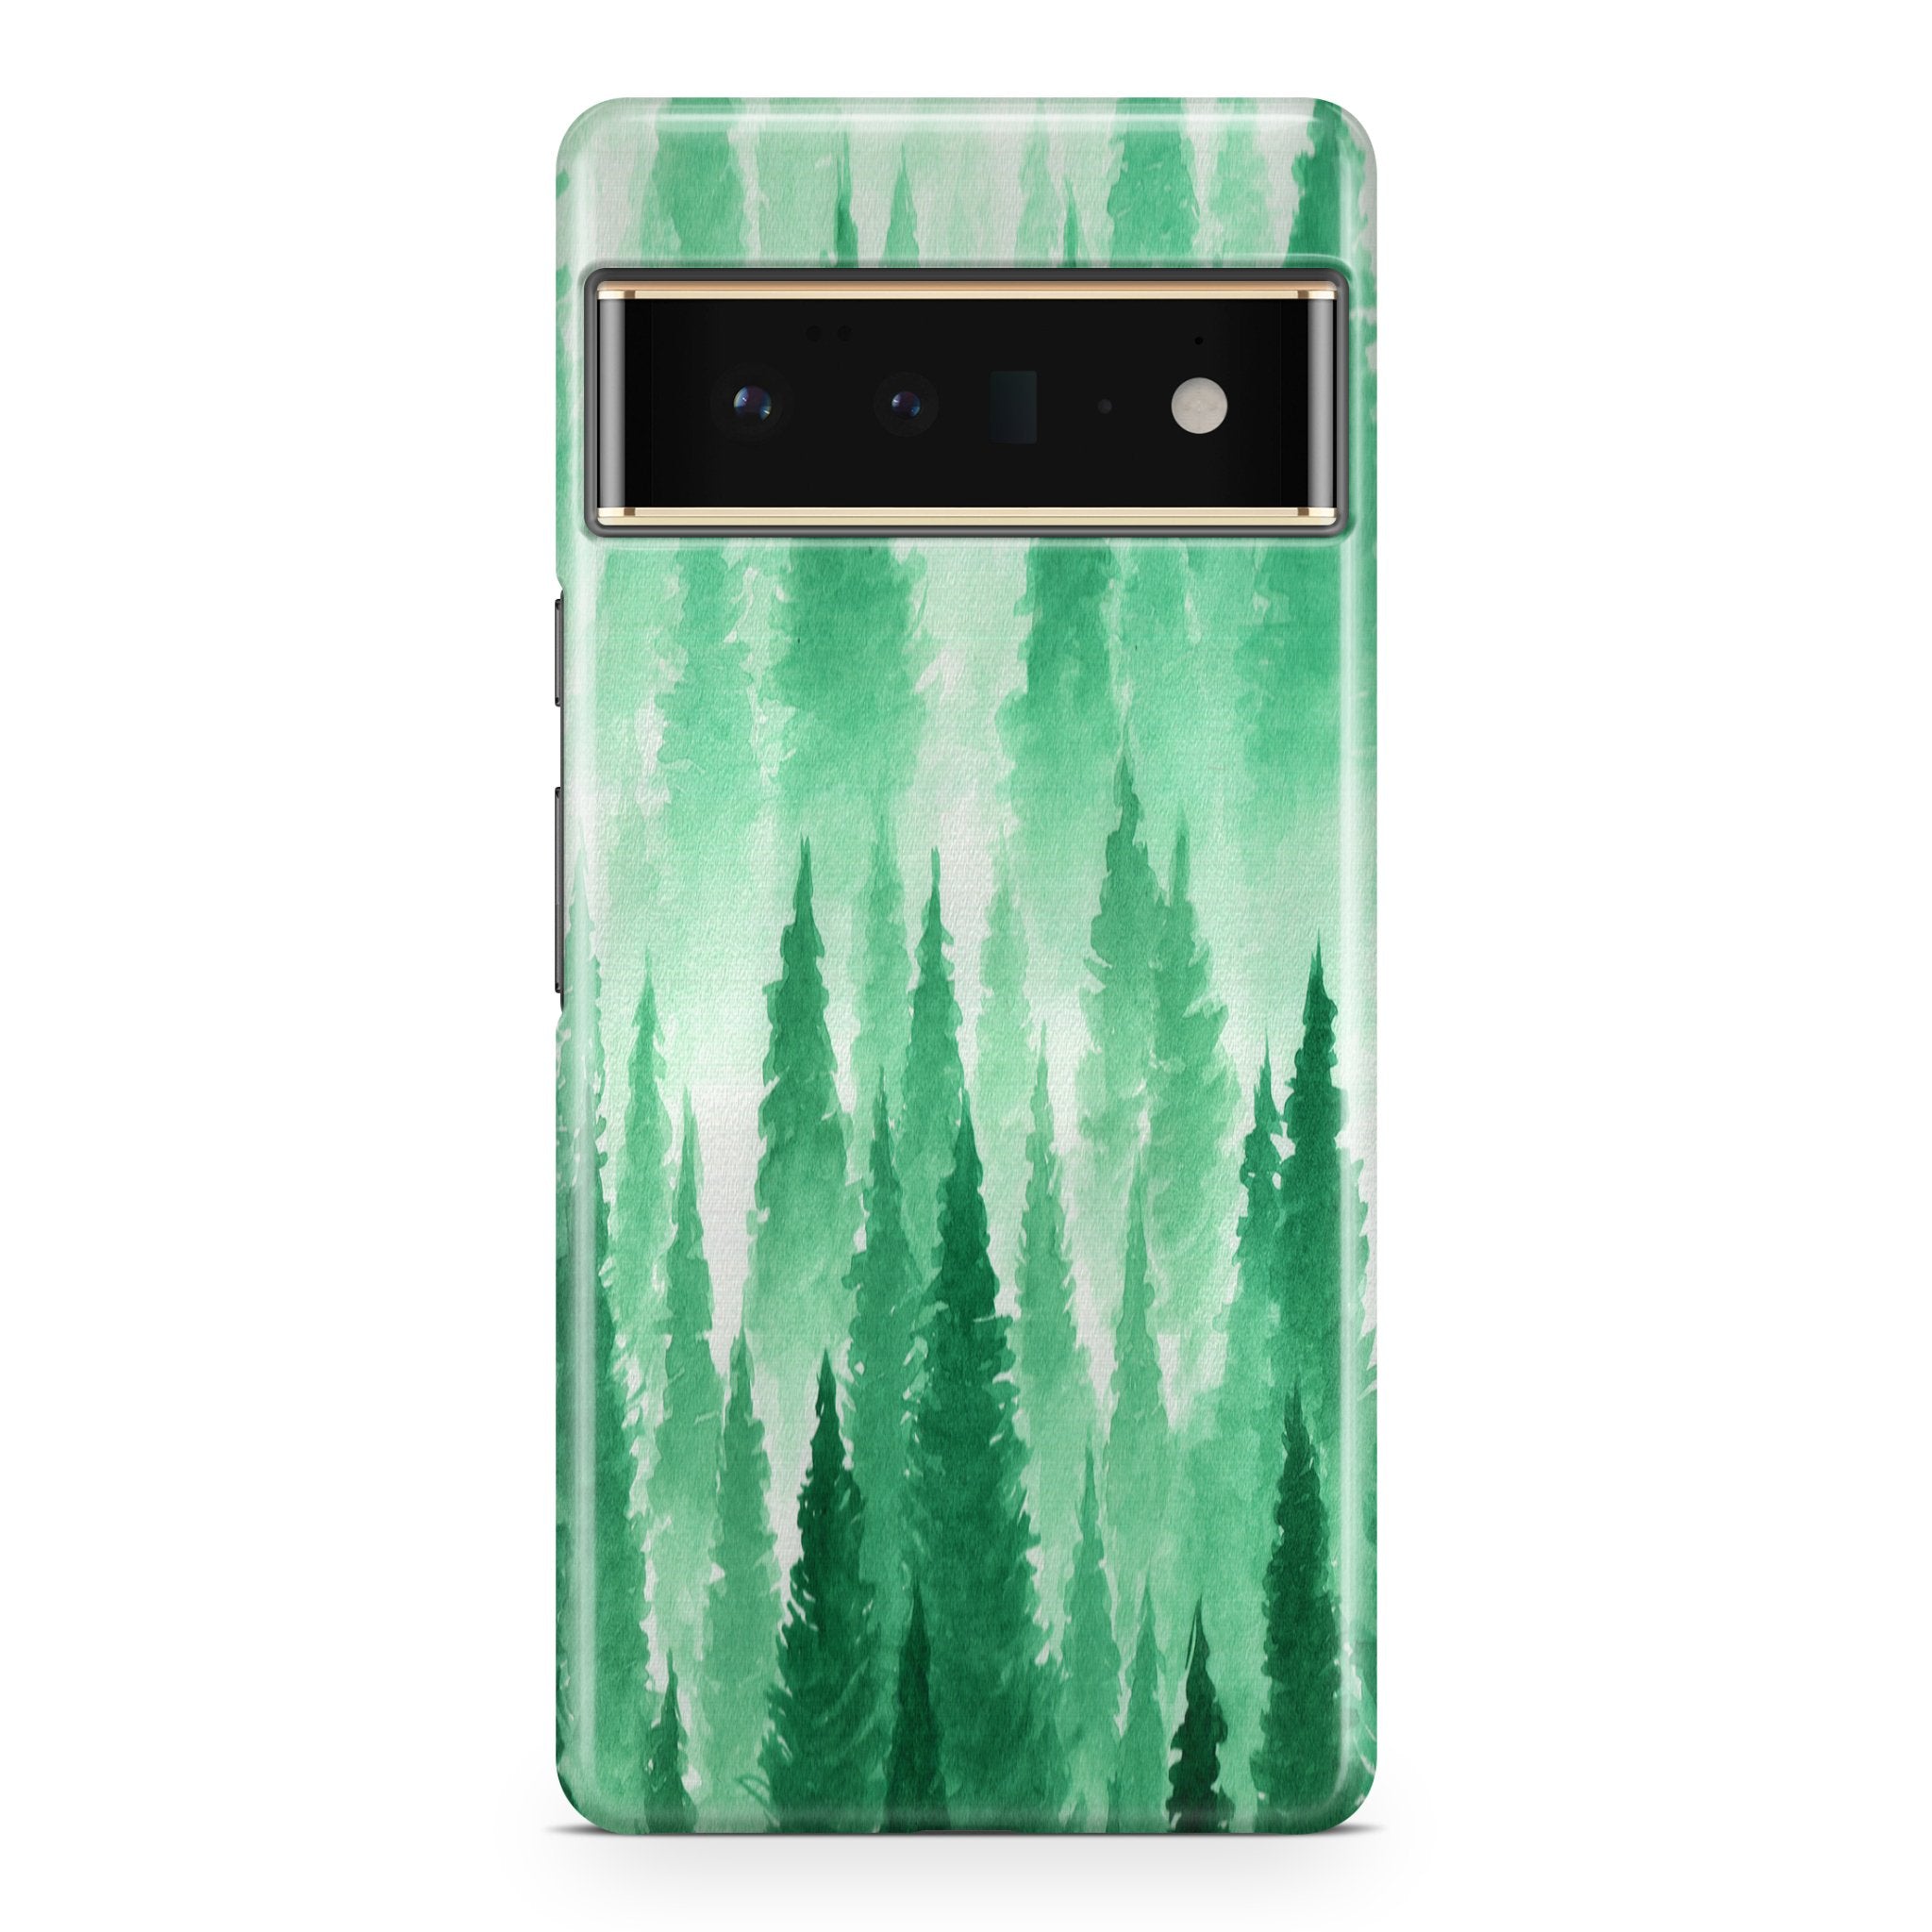 Green Mist Forest - Google phone case designs by CaseSwagger